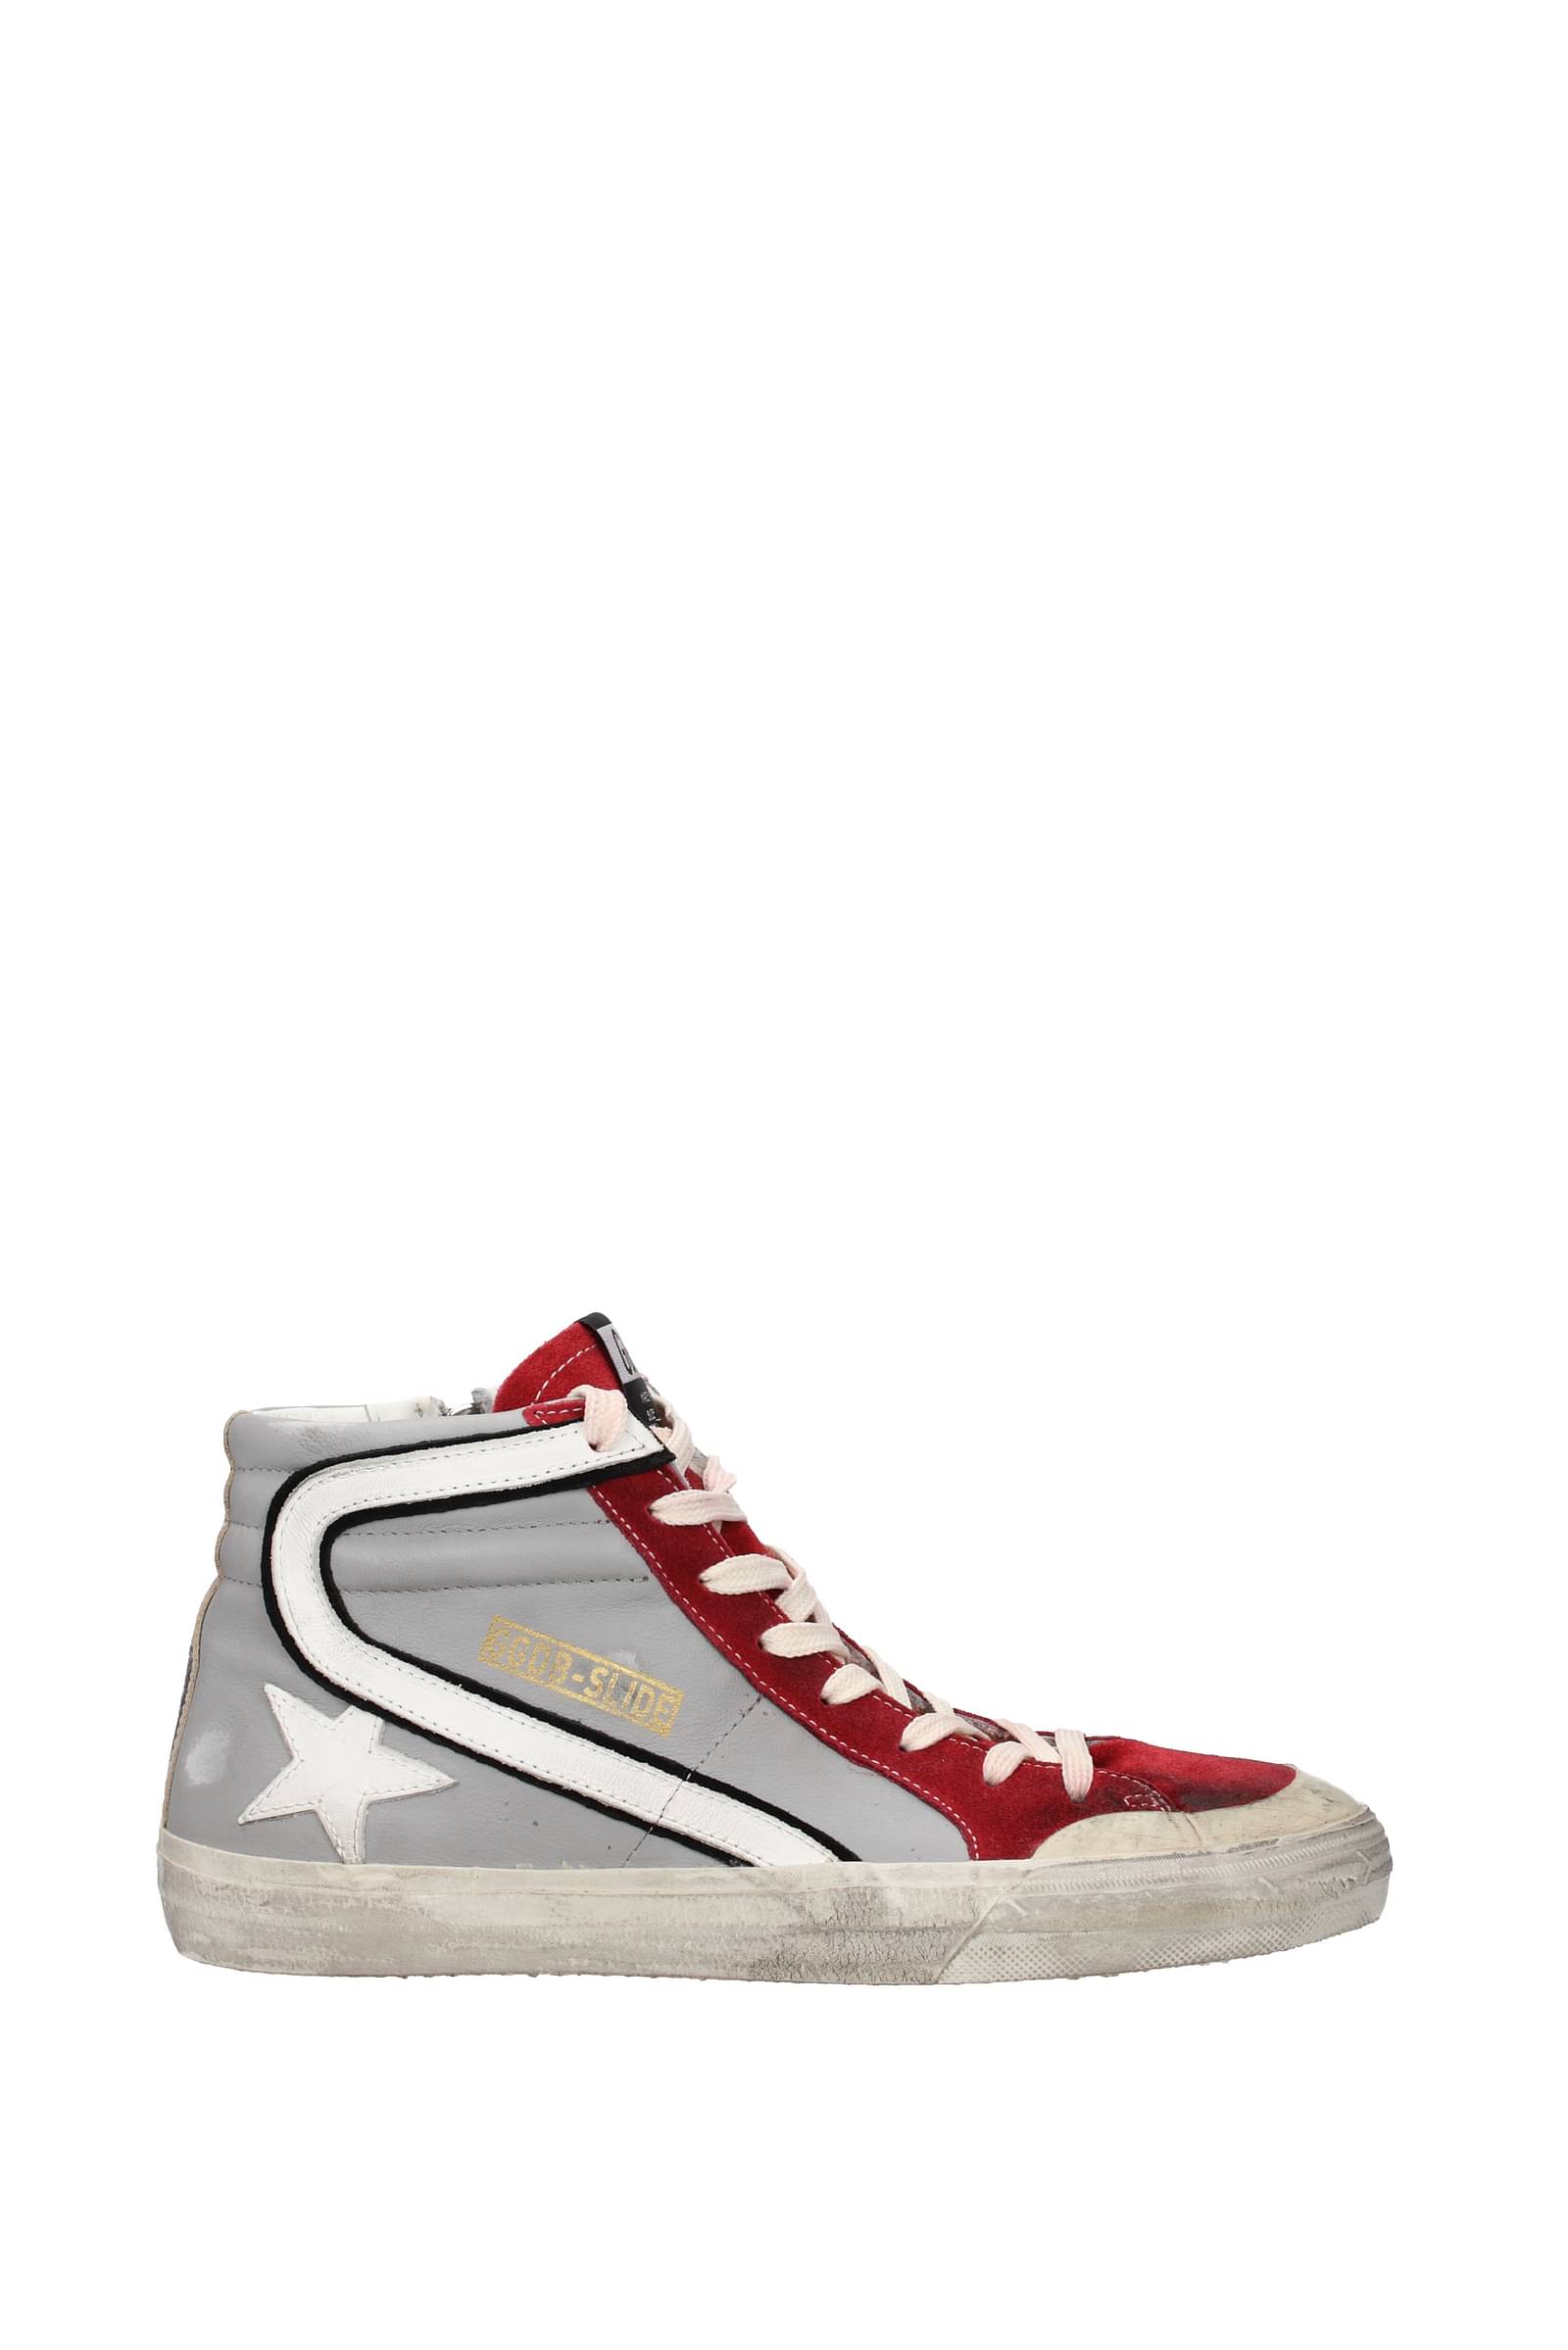 Slide sneakers with silver glitter and purple laminated leather upper | Golden  Goose